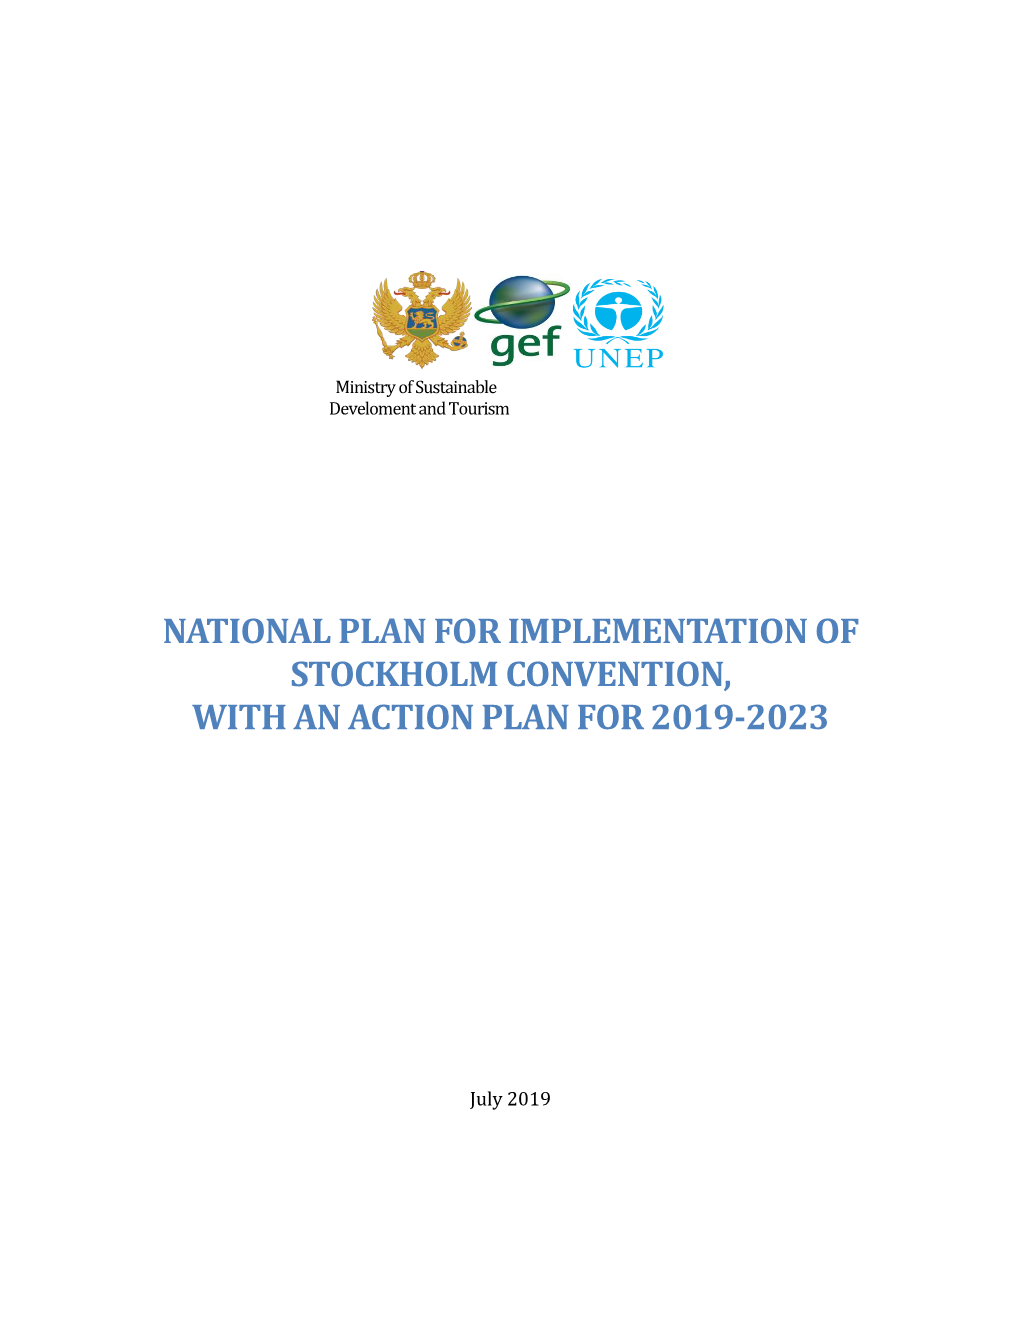 National Plan for Implementation of Stockholm Convention, with an Action Plan for 2019-2023